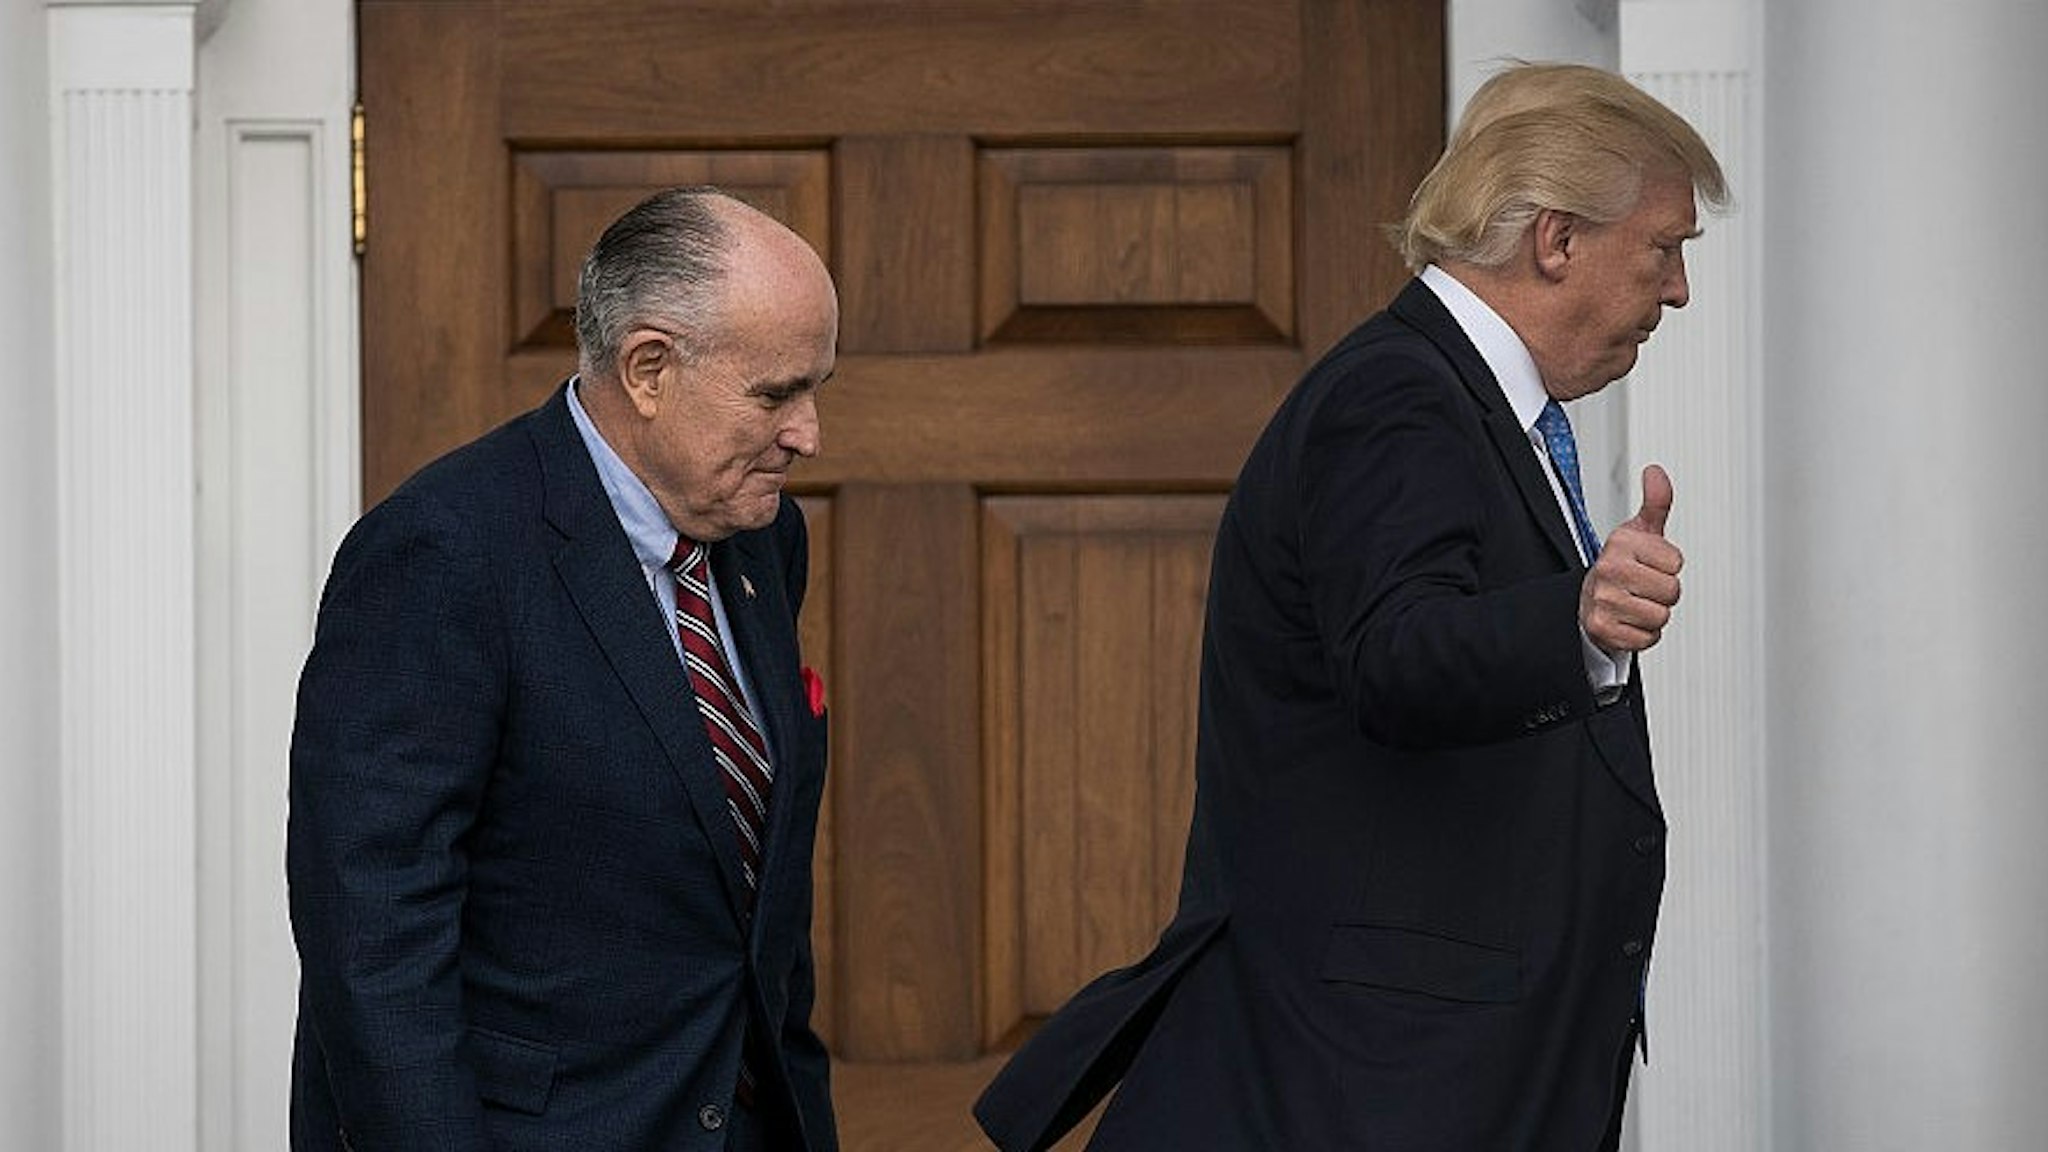 BEDMINSTER TOWNSHIP, NJ - NOVEMBER 20: (L to R) Former New York City mayor Rudy Giuliani and president-elect Donald Trump head into the clubhouse for their meeting at Trump International Golf Club, November 20, 2016 in Bedminster Township, New Jersey. Trump and his transition team are in the process of filling cabinet and other high level positions for the new administration. (Photo by